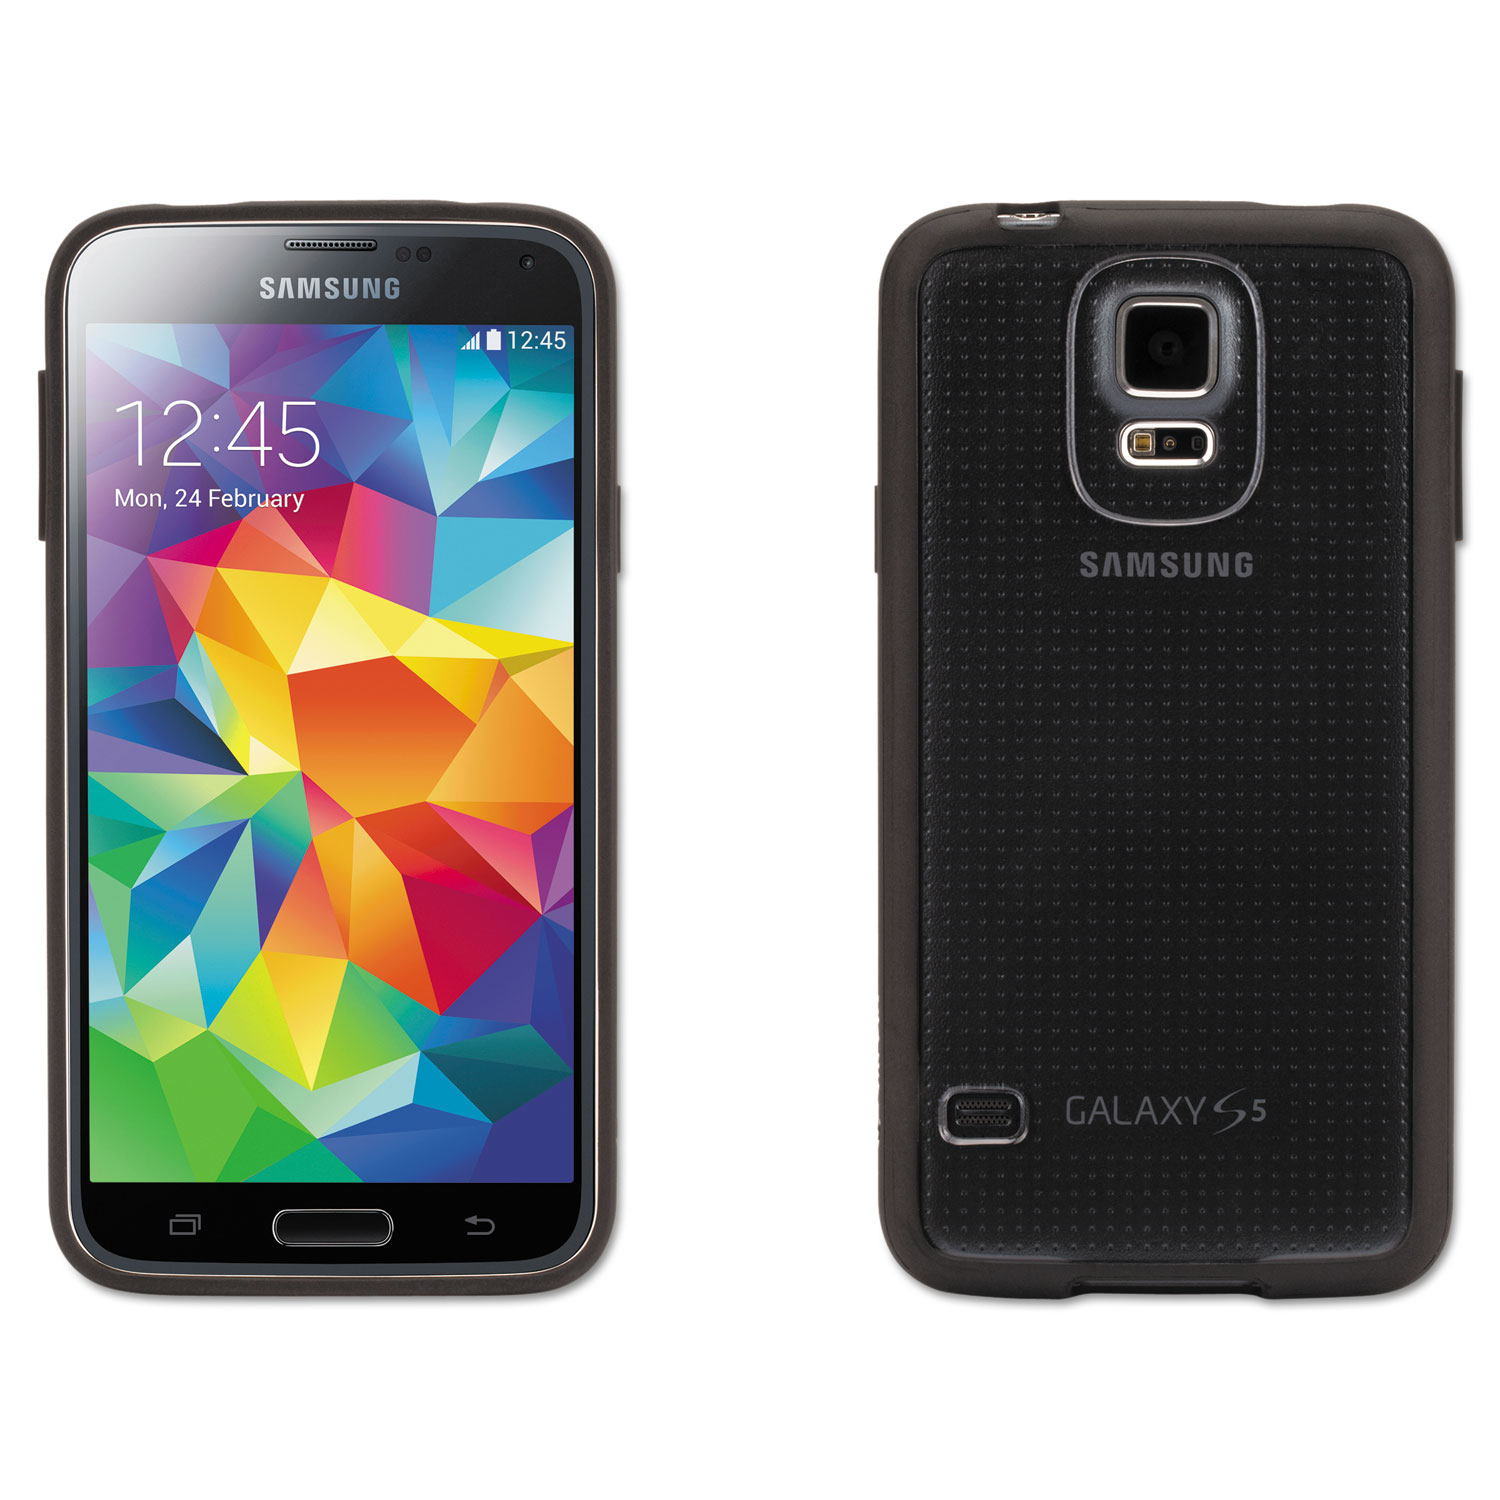 Reveal Case for Samsung Galaxy S 5, Black/Clear